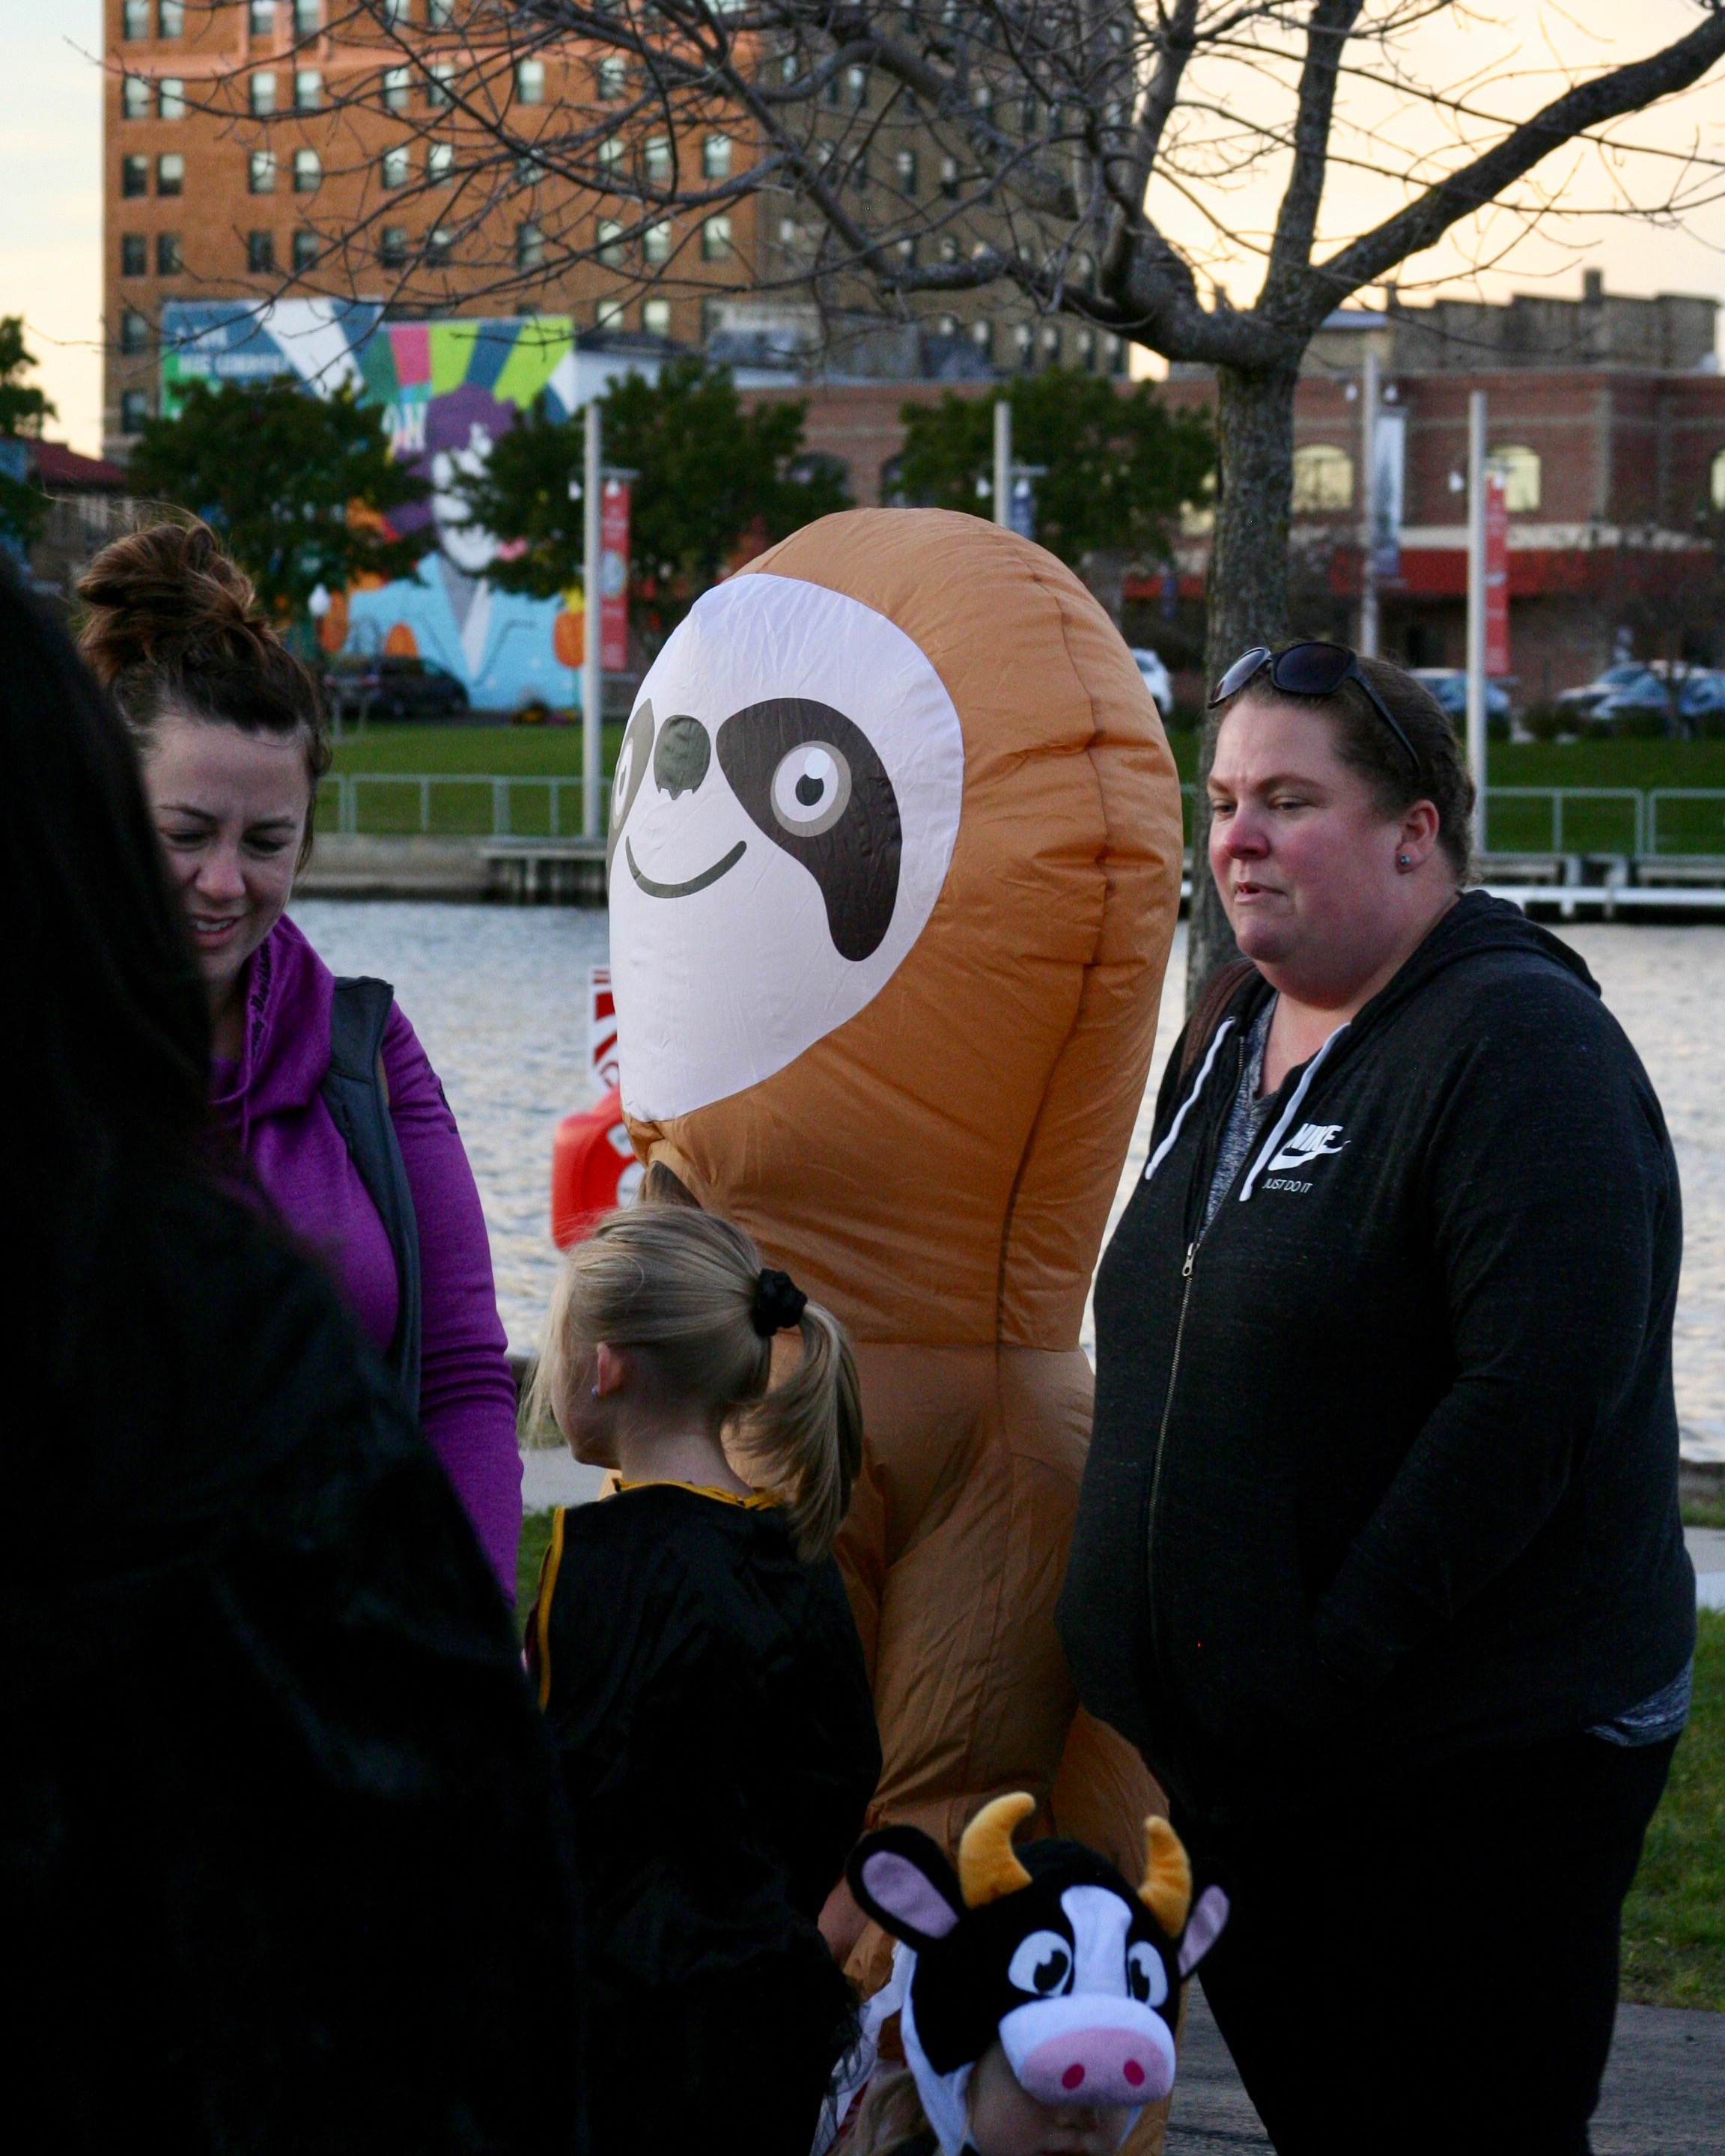 Participants at event, including person in inflatable sloth costume